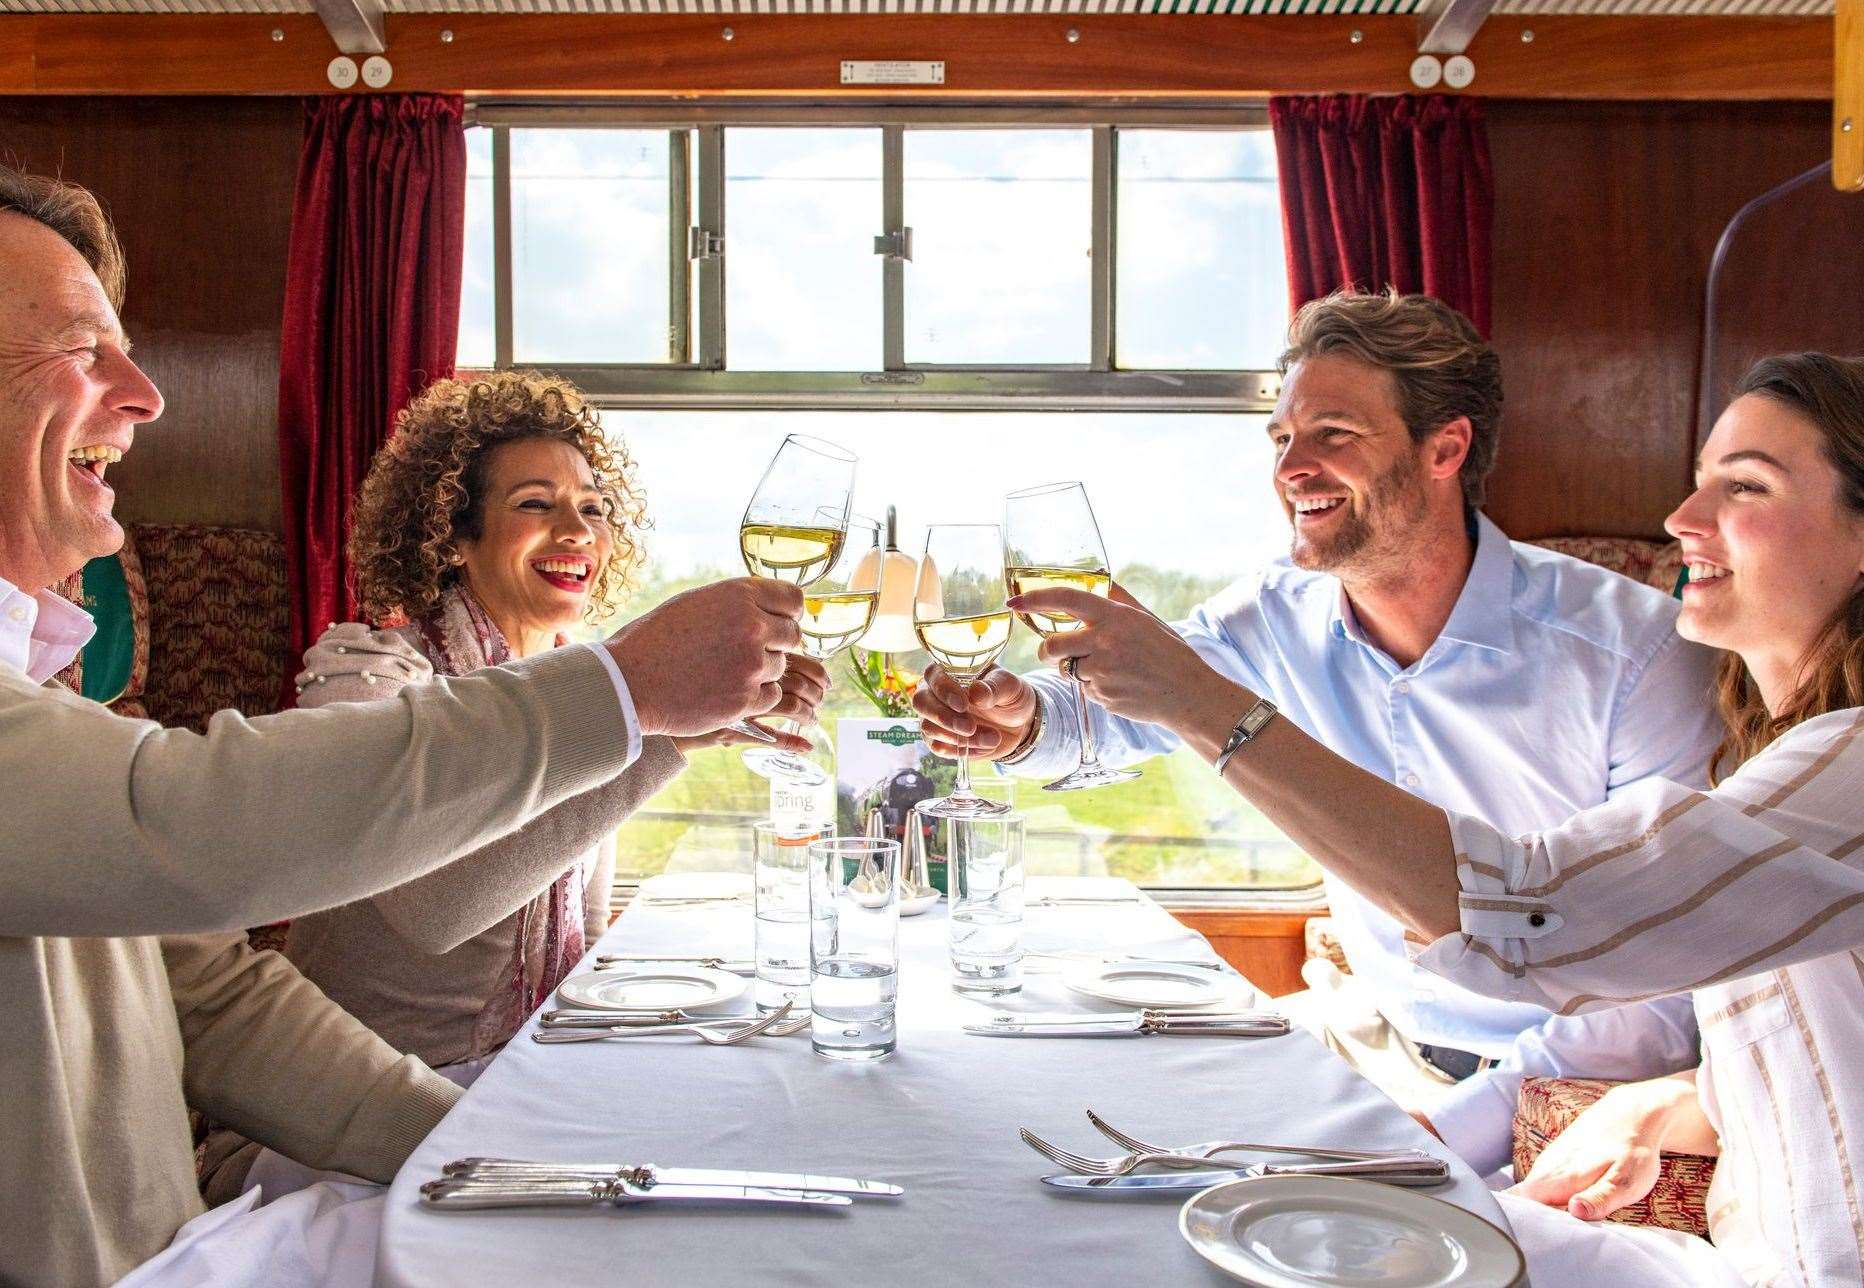 The Pullman Style Dining option will cost £195 per person. Picture: Steam Dreams